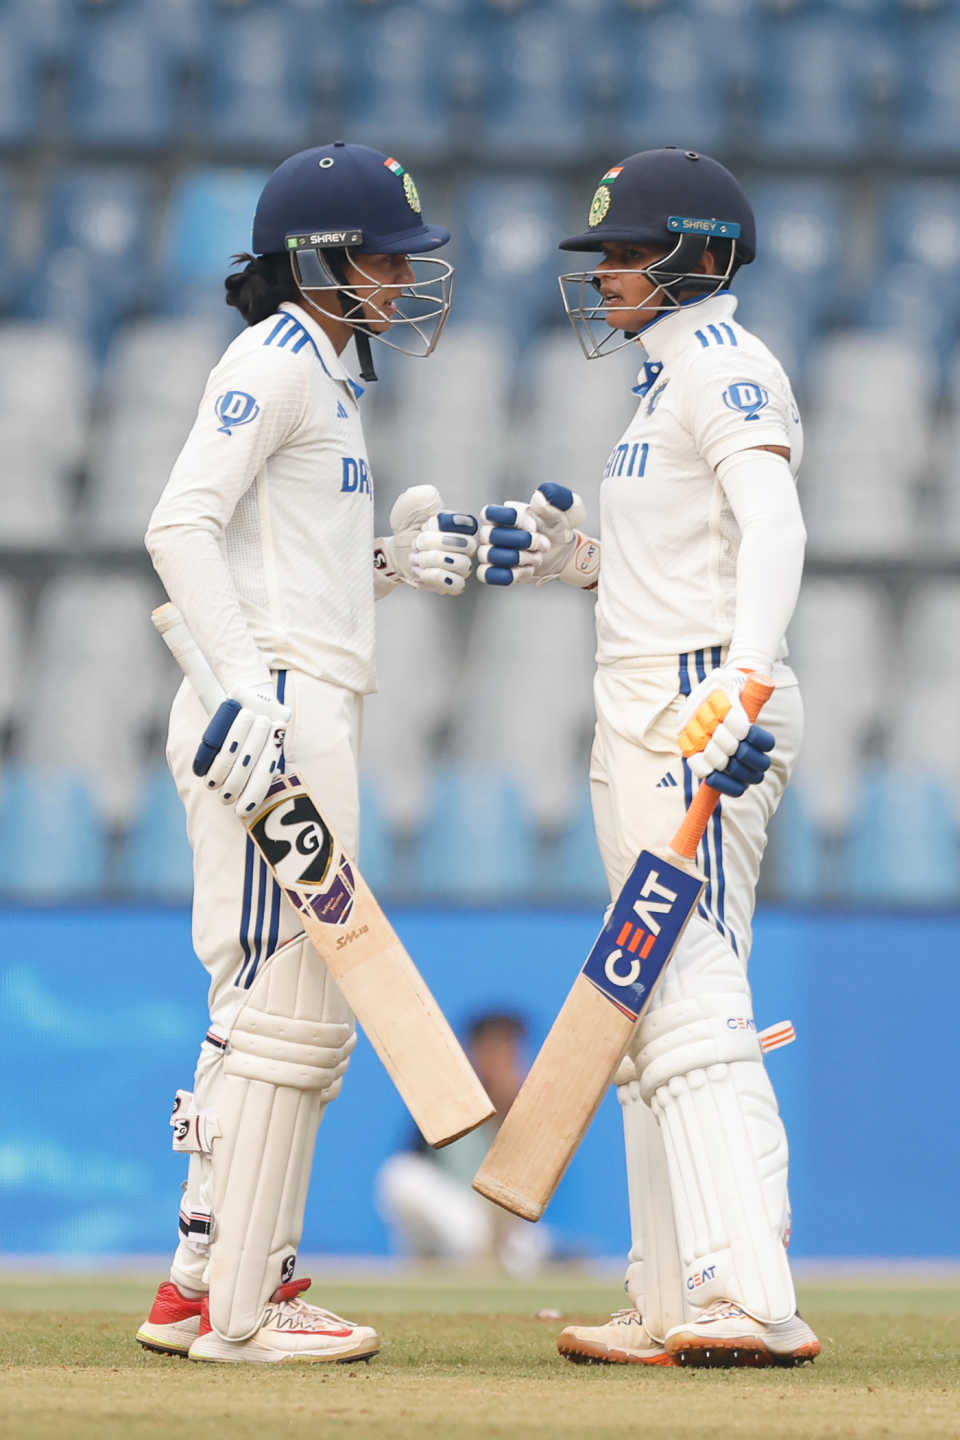 Mandhana's grace and Shafali's timing build a solid foundation for India's reply